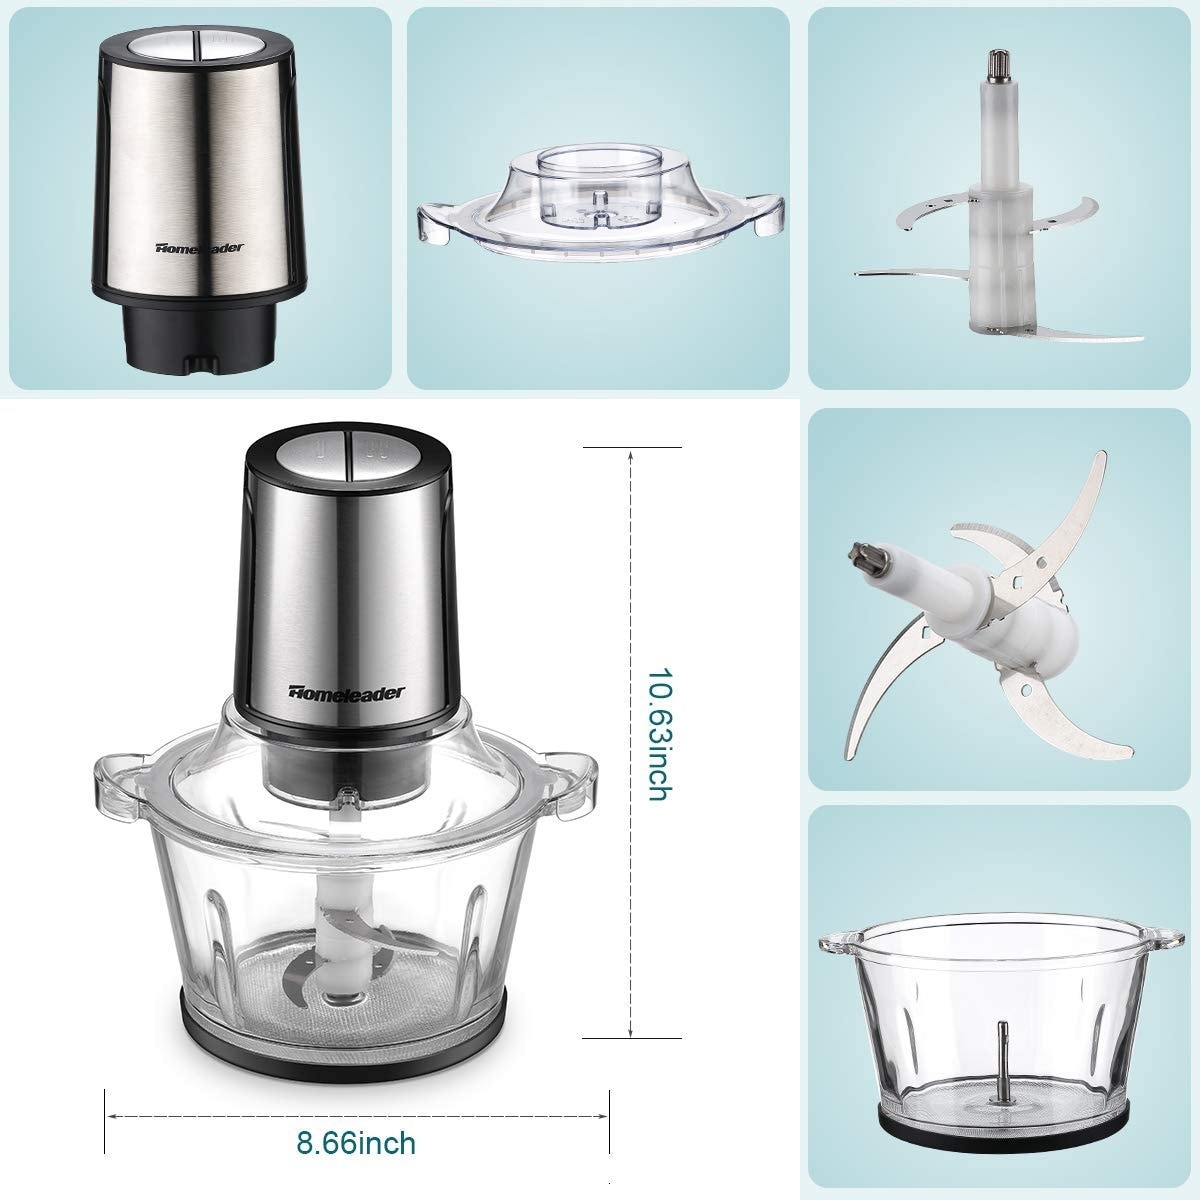 https://ak1.ostkcdn.com/images/products/is/images/direct/845c7a22606ccc84ad483a15ab034a8ee3643669/Electric-Food-Chopper%2C-8-Cup-Food-Processor-by-Homeleader%2C-2L-BPA-Free-Glass-Bowl-Blender-Grinder.jpg